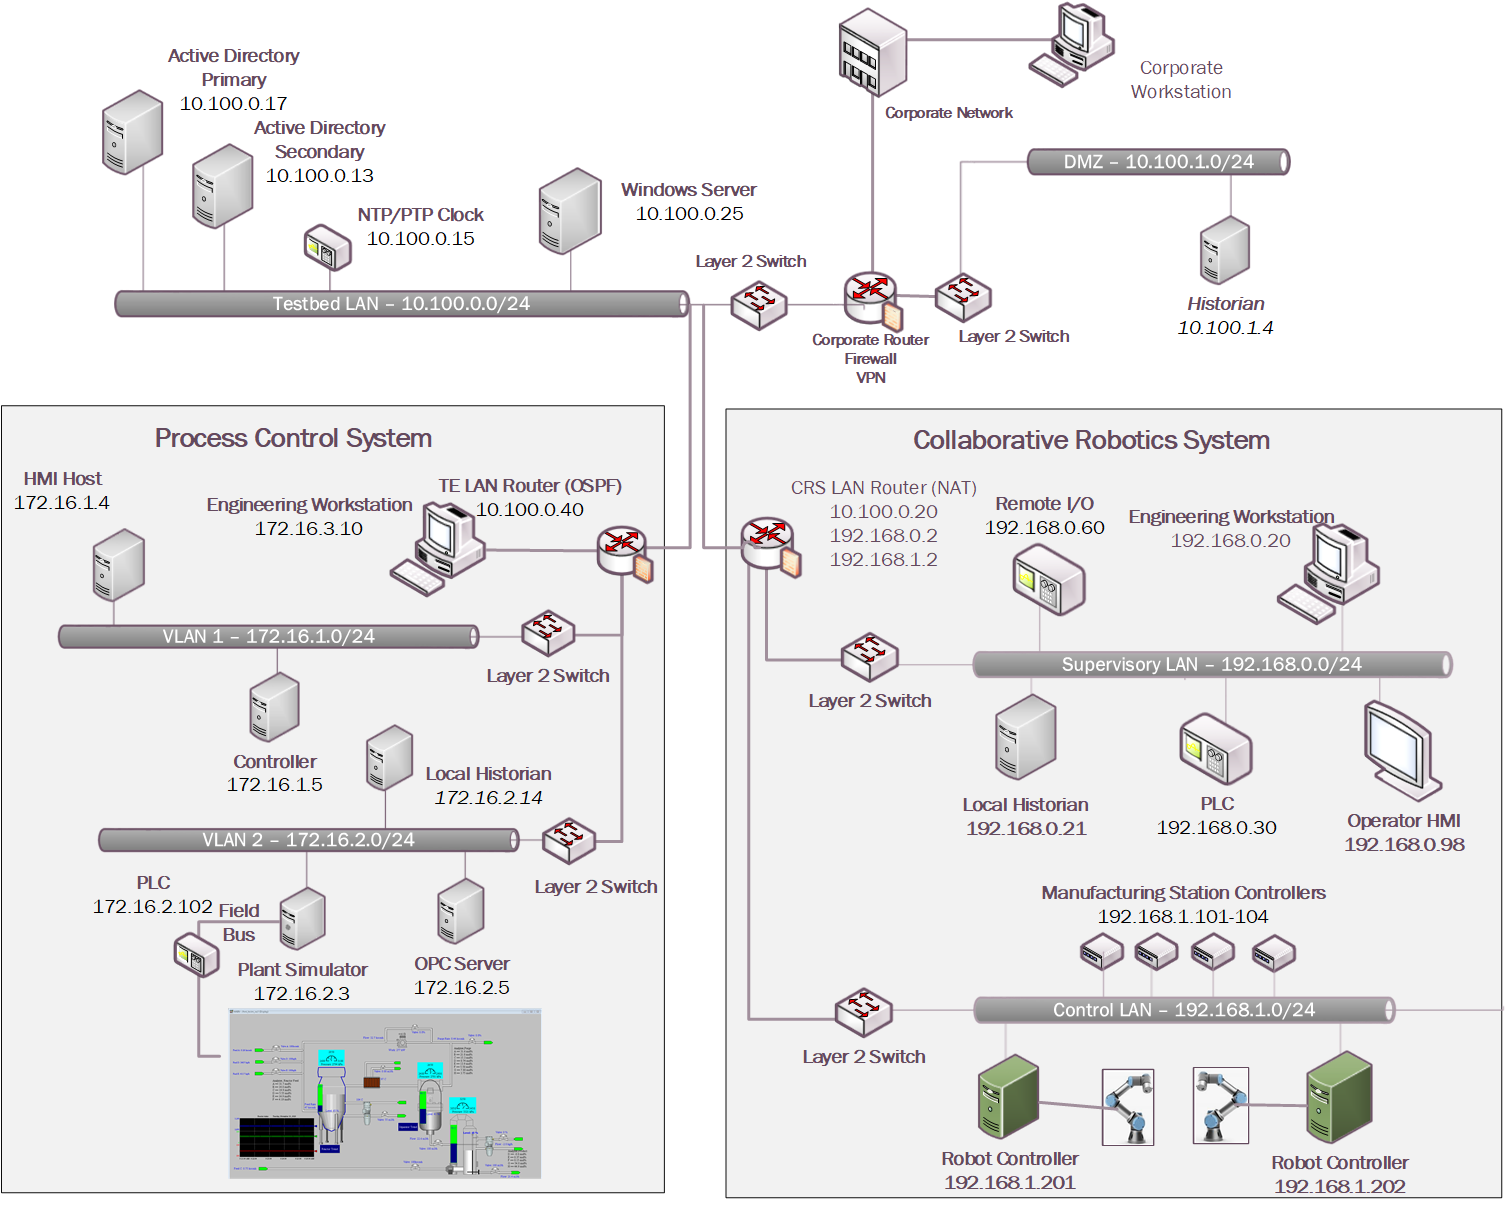 Architecture Diagram of the Cybersecurity for Smart Manufacturing Systems environment. The lab consists of two systems: the Process Control System and the Collaborative Robotics System. There are six networks in this environment: the Testbed LAN, the DMZ, VLAN 1 in the PCS, VLAN 2 in the PCS, Supervisory LAN in the CRS and the Control LAN in the CRS.